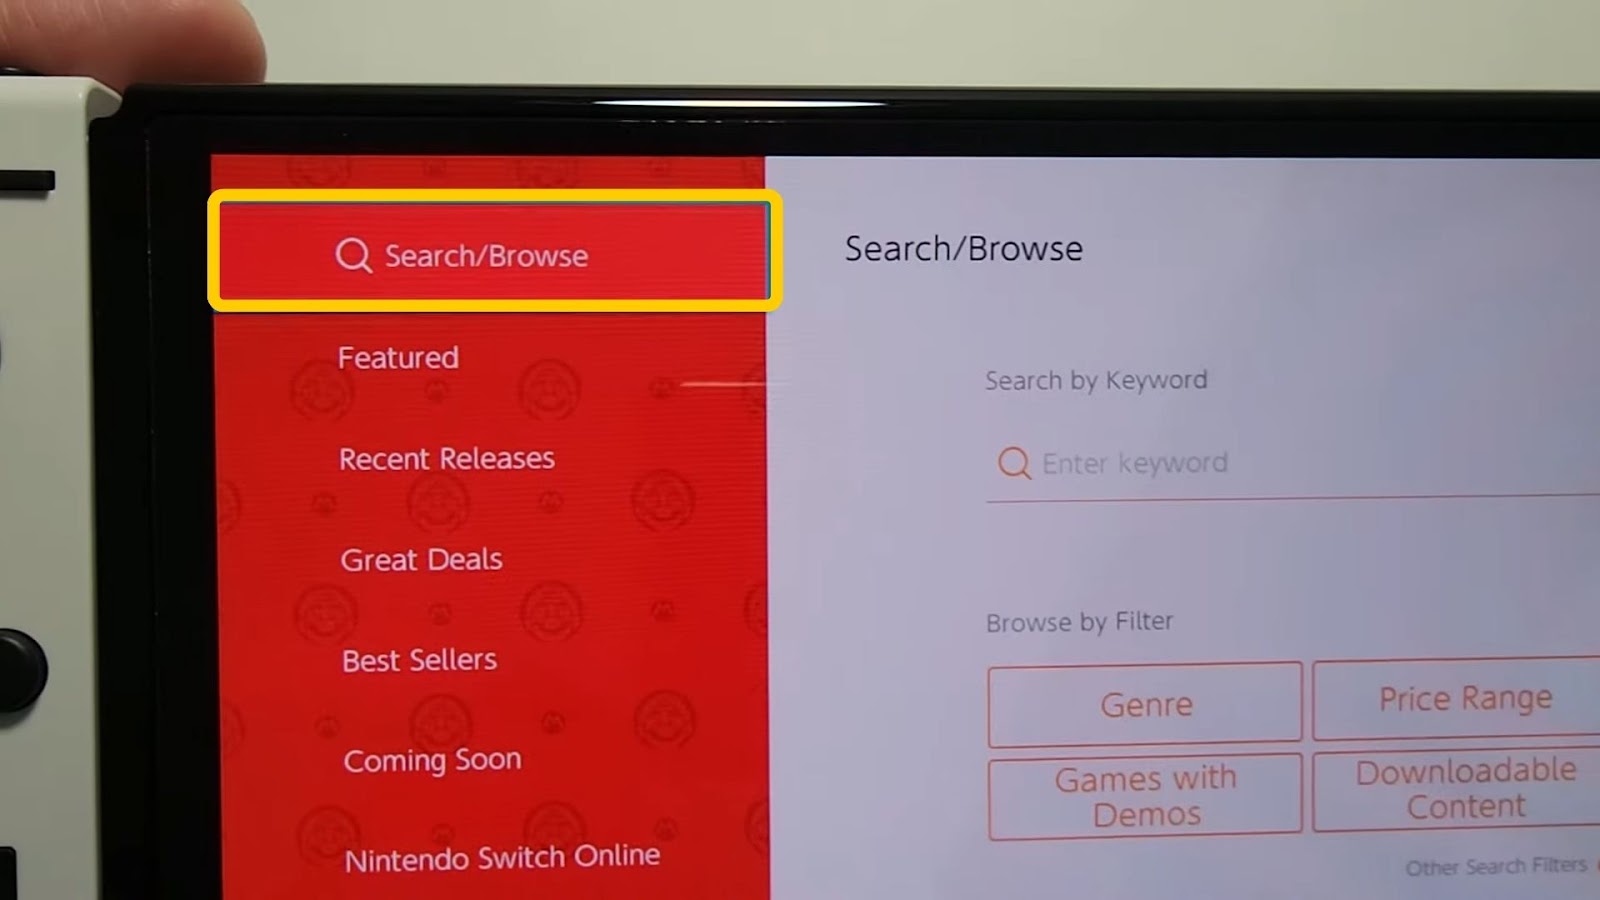 Search for a Game on Nintendo Switch eShop